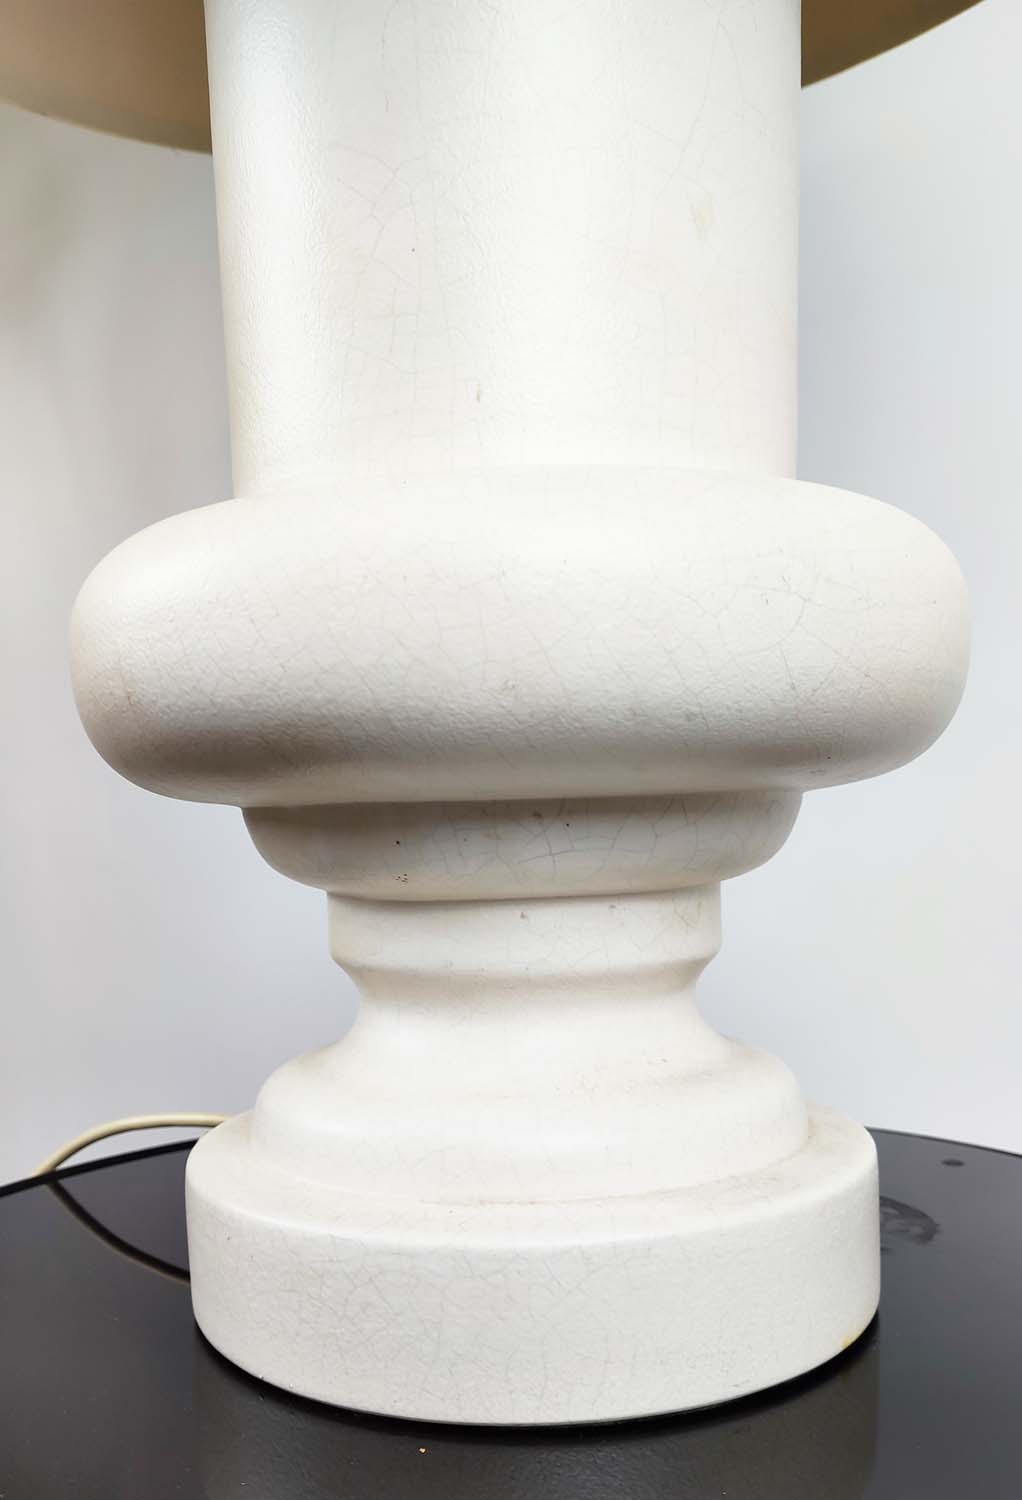 TABLE LAMP, white ceramic, with shade, 92cm high, 55cm diameter. - Image 4 of 6